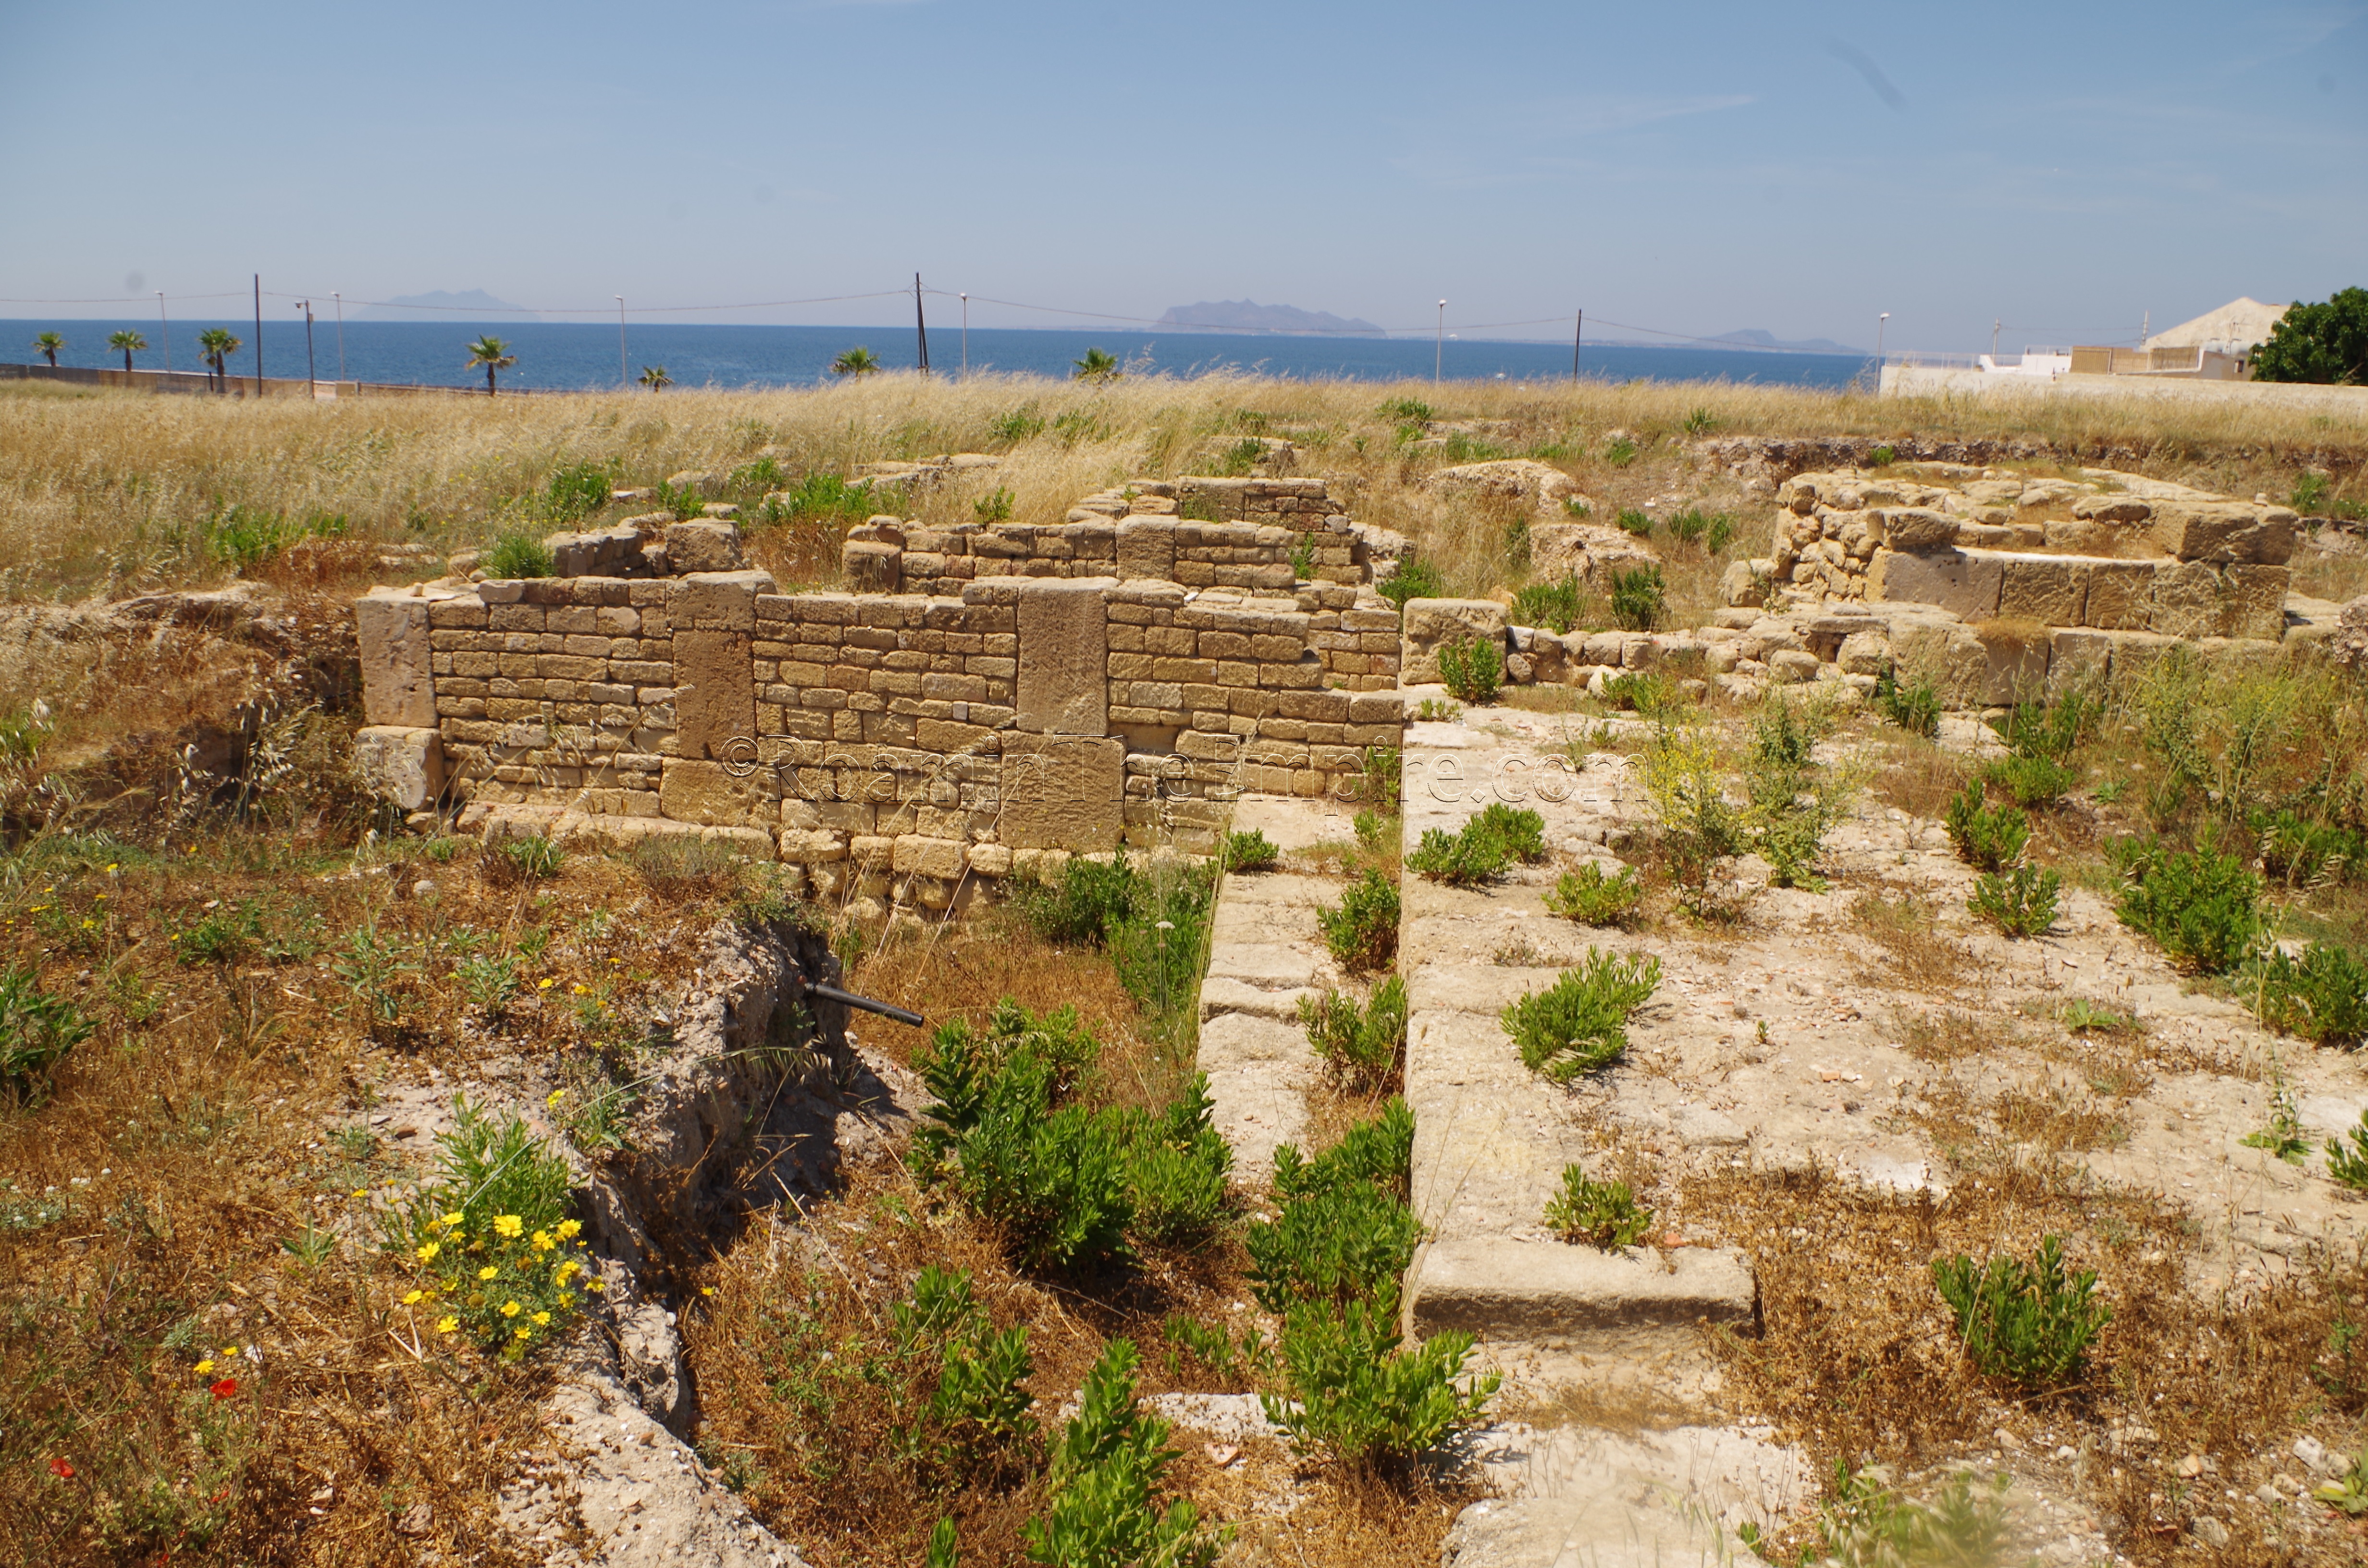 Northwest fortifications of Lilybaeum, dated to the 3rd to 1st century BCE.